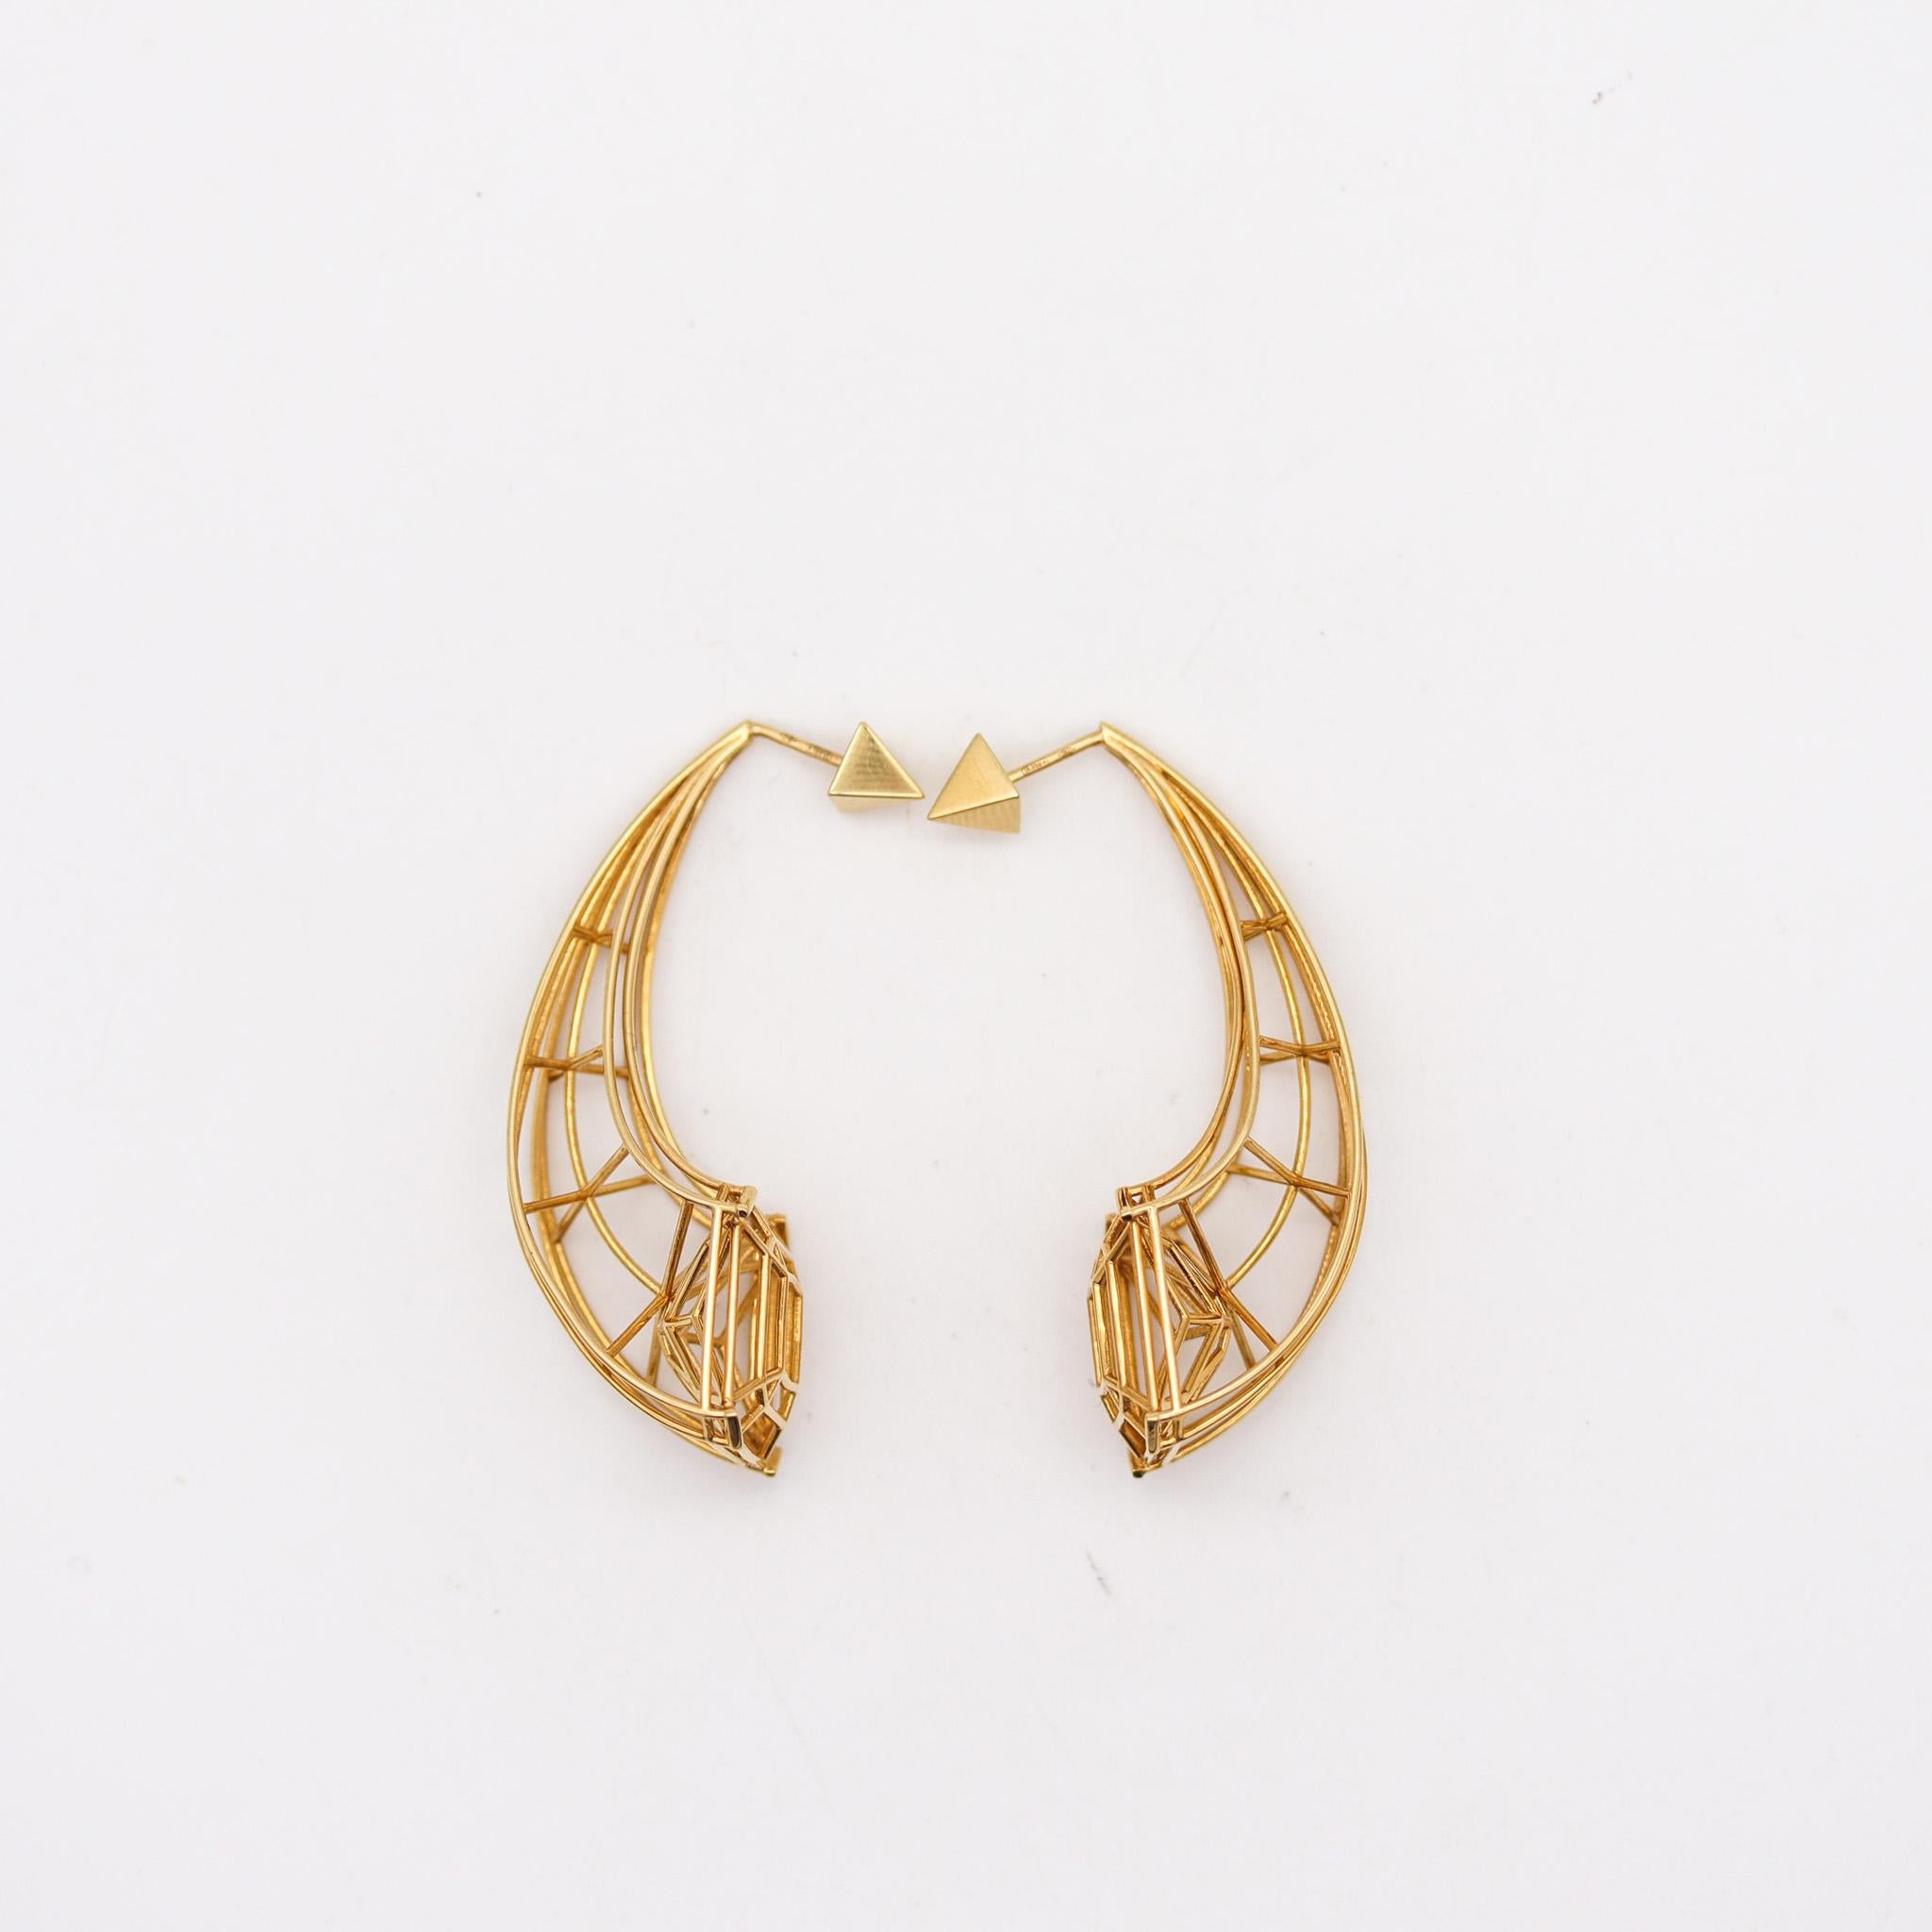 Sculptural pair of earrings designed by Peruffo.

An statement pair of earrings, created in Italy by the jewelry designers of Peruffo in Vicenza. These sculptural pair has been crafted in a three dimensional shape in solid yellow gold of 18 karats